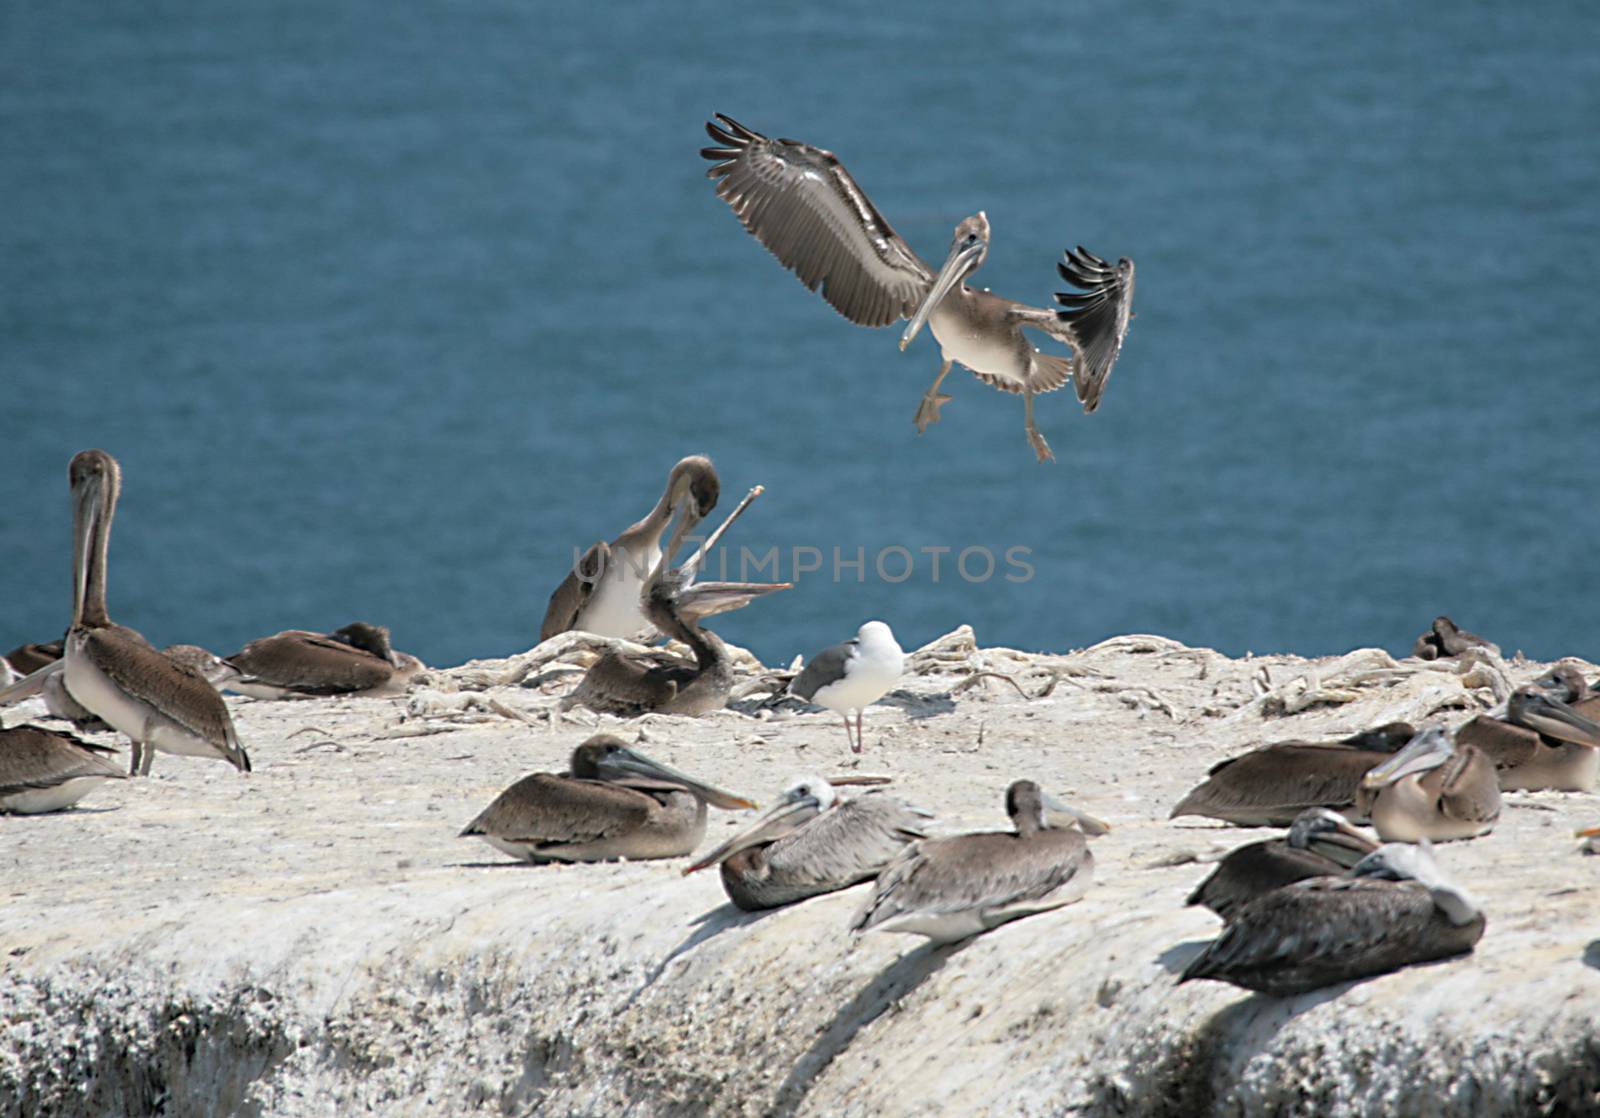 Wild Pelicans on a Cliff With One Returning to the Habitat